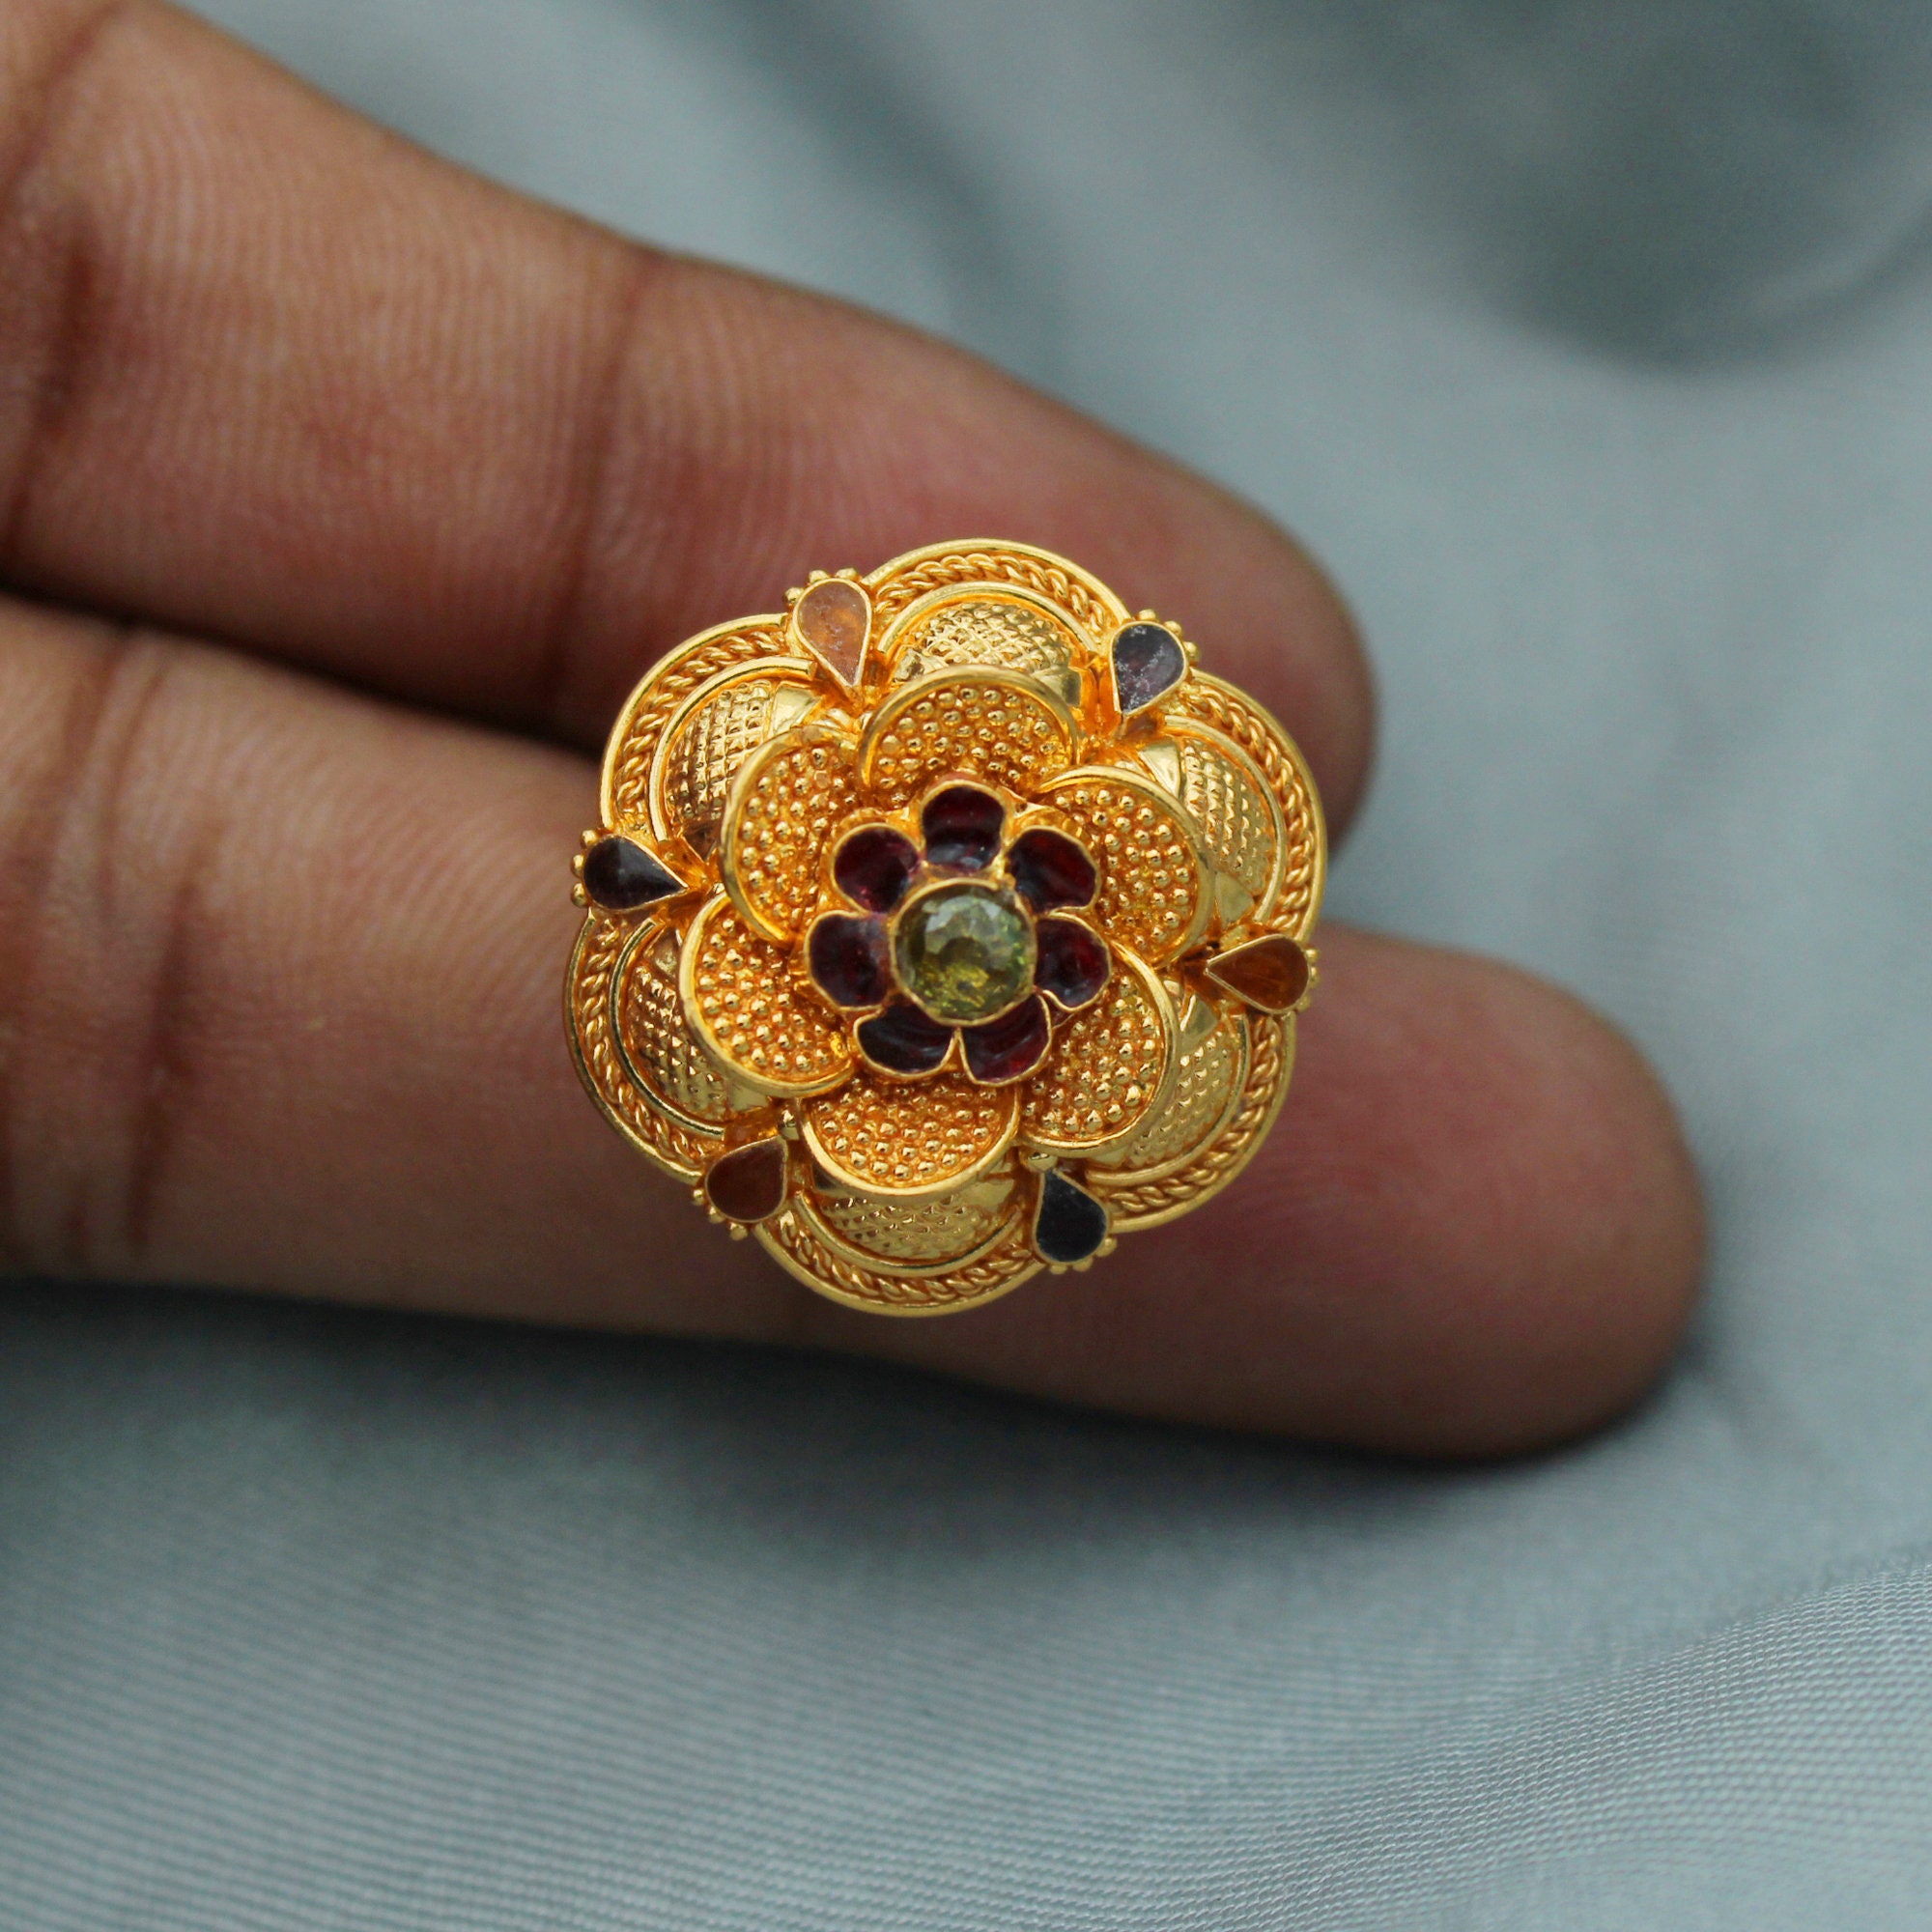 Cast Gold Flower Ring with Yellow Sapphire Center by J'Adorn Designs